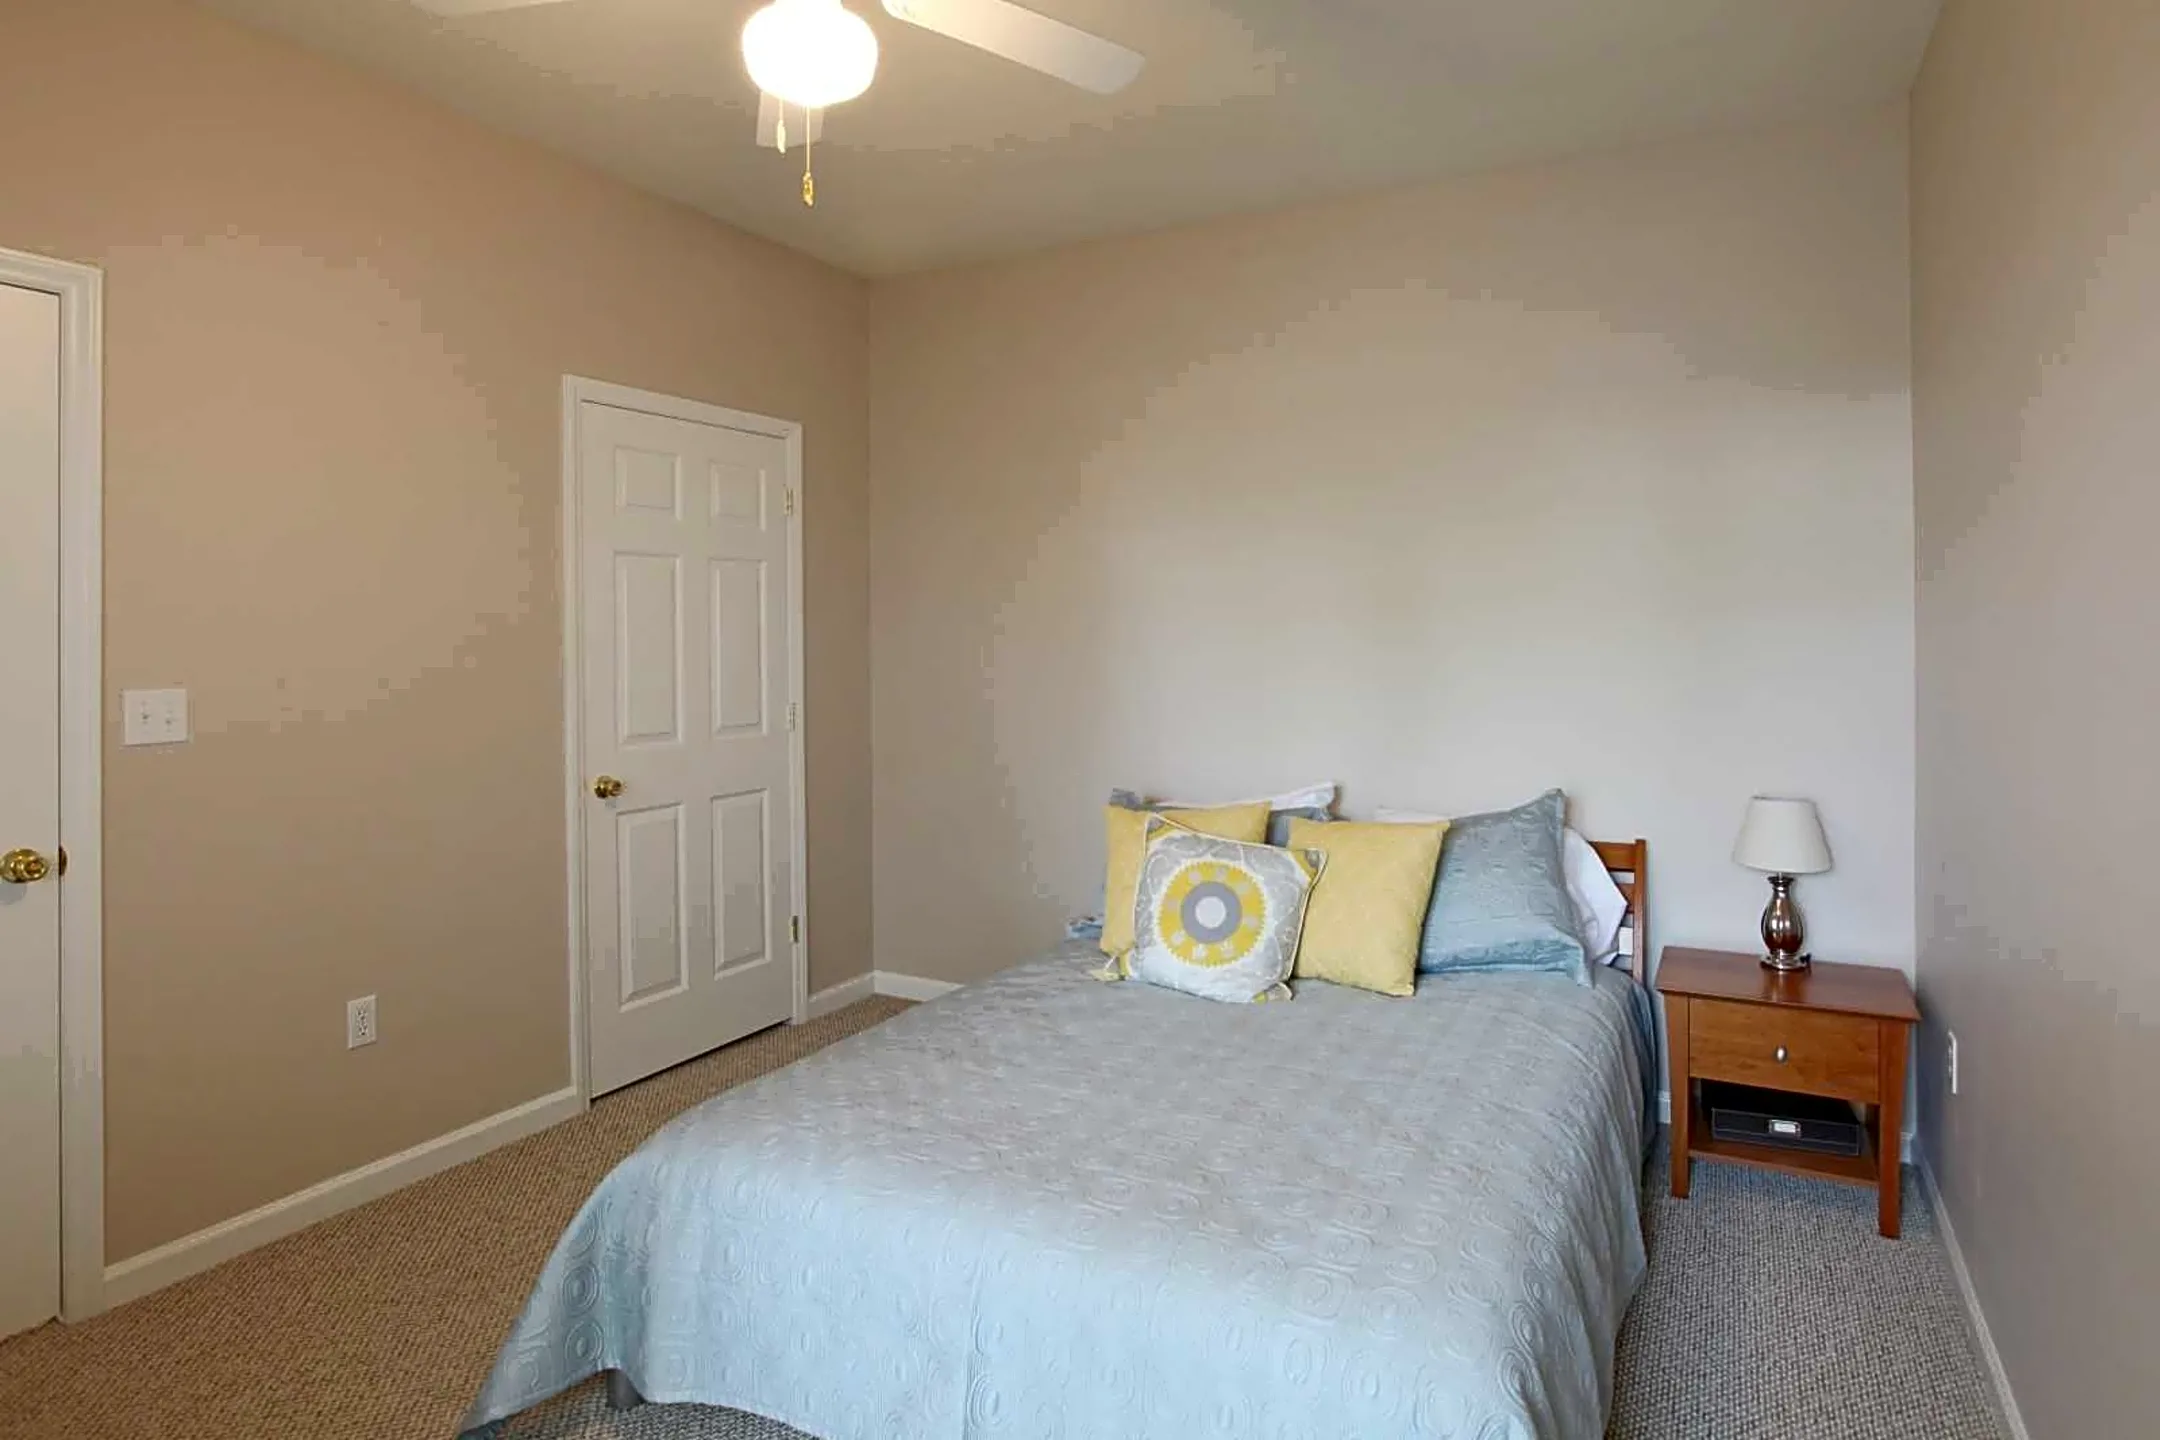 Bedroom - The Pointe at Wimbledon - Greenville, NC